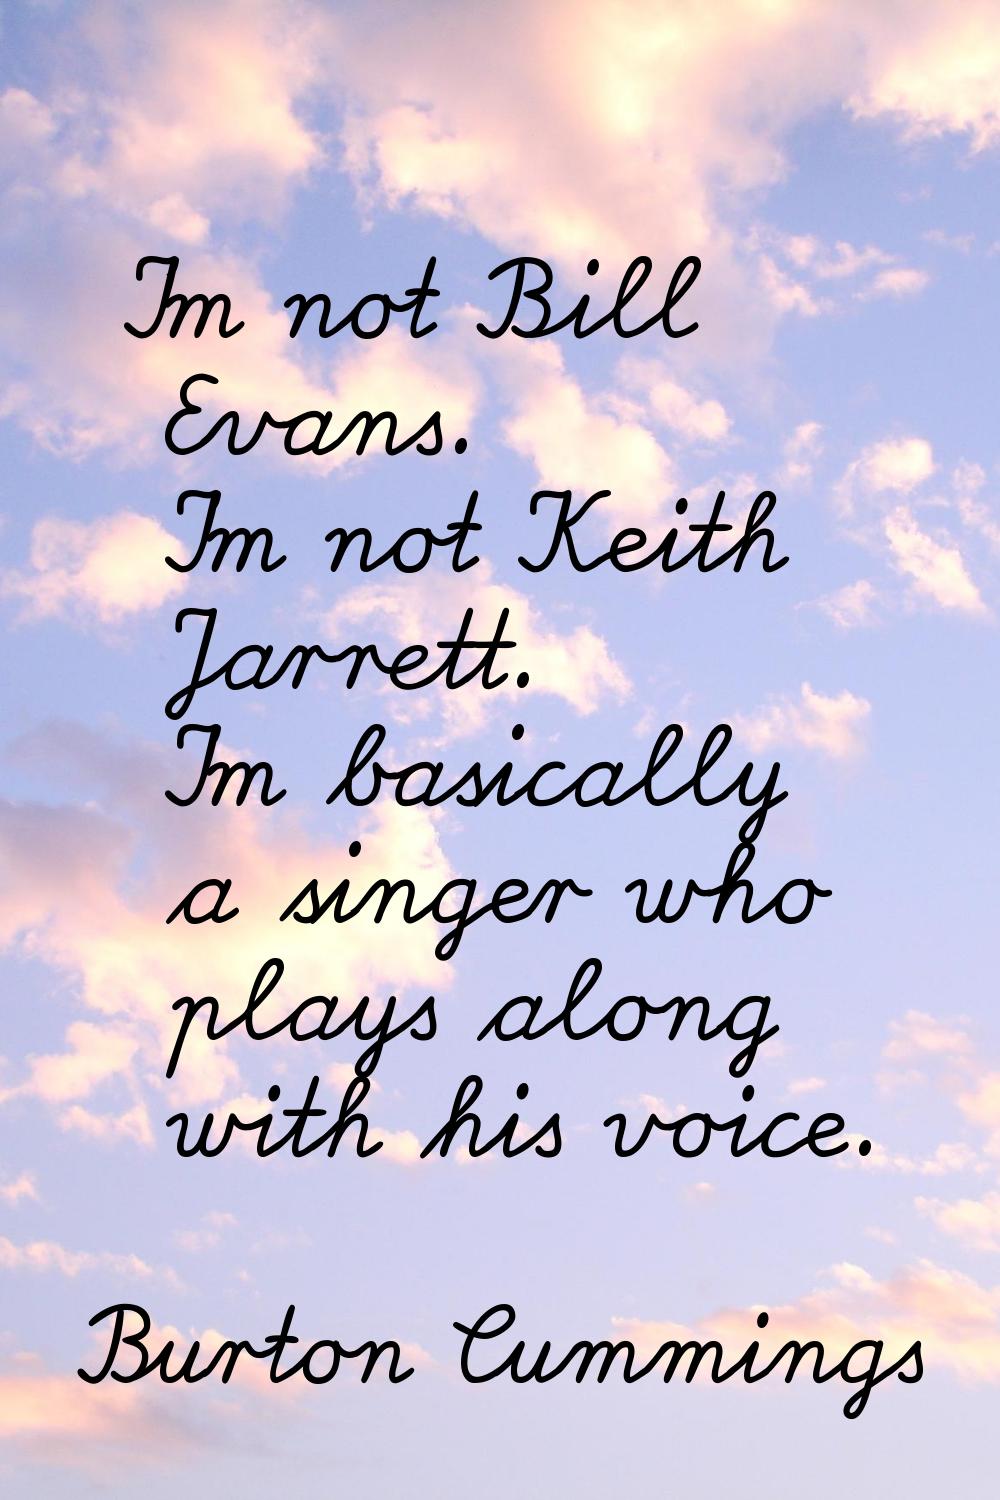 I'm not Bill Evans. I'm not Keith Jarrett. I'm basically a singer who plays along with his voice.